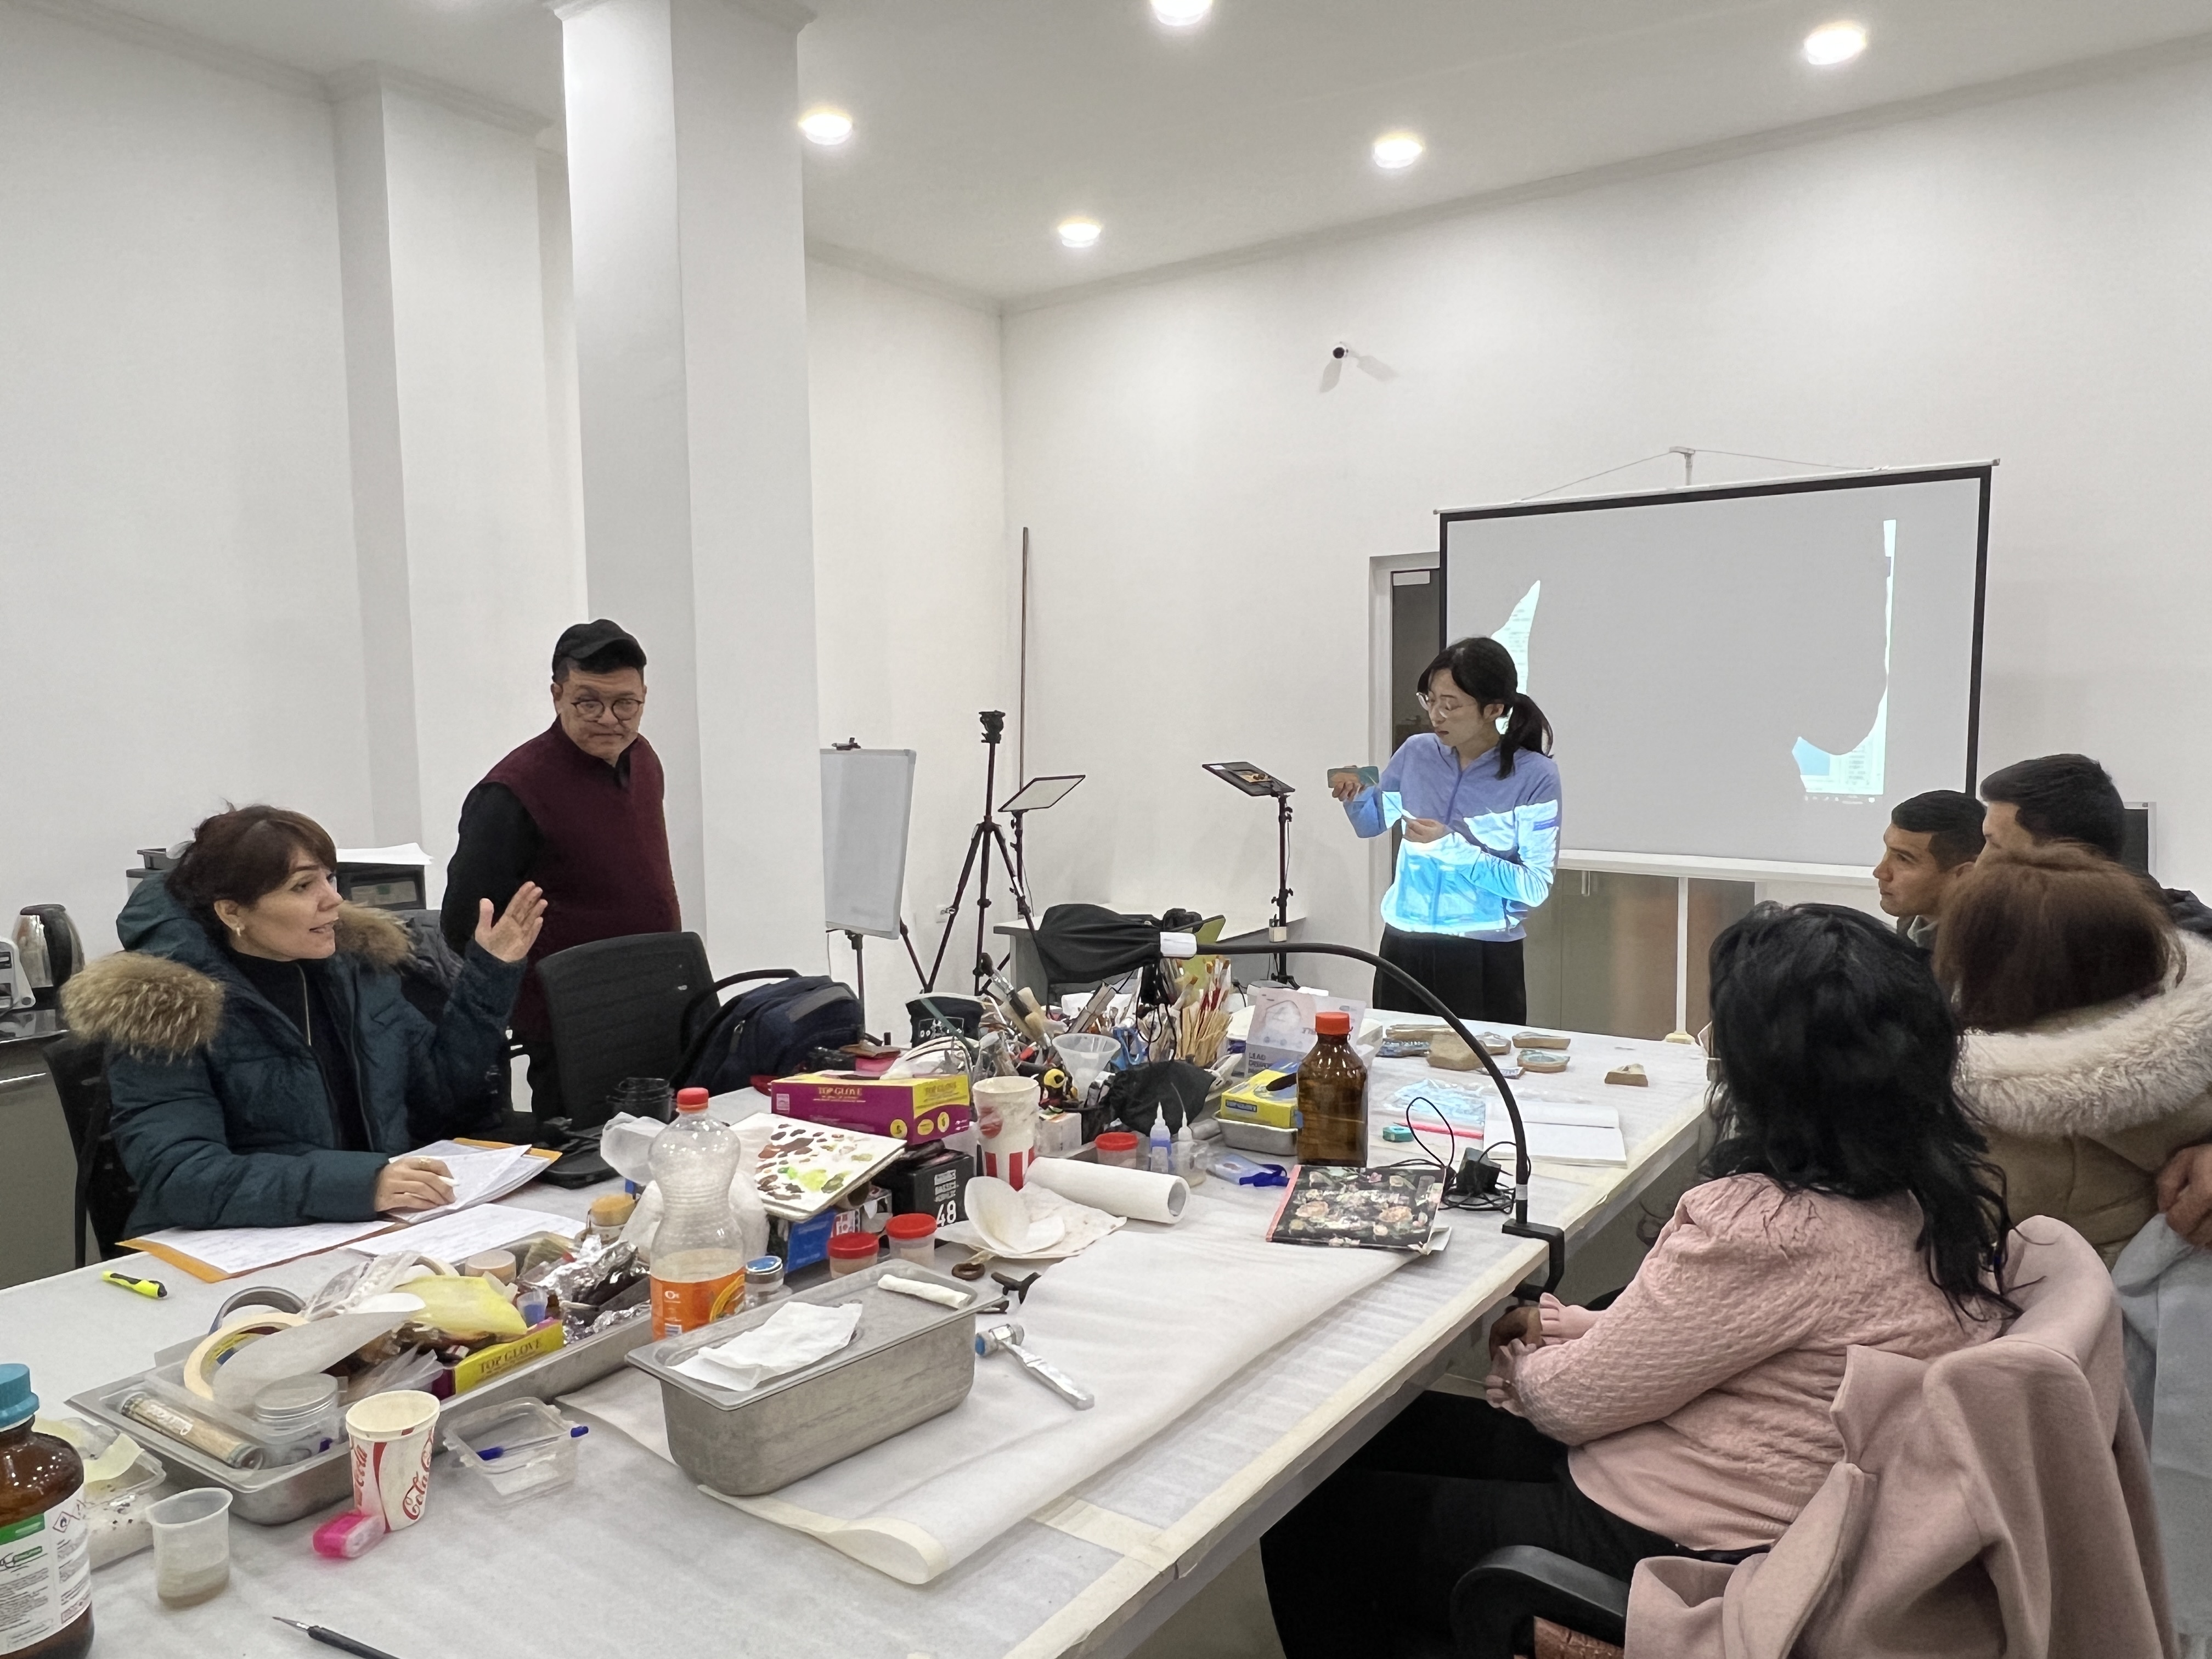 IICAS and the Nara National Research Institute for Cultural Properties (NABUNKEN, Japan) organised a two-day (6th and 7th December 2022) seminar 